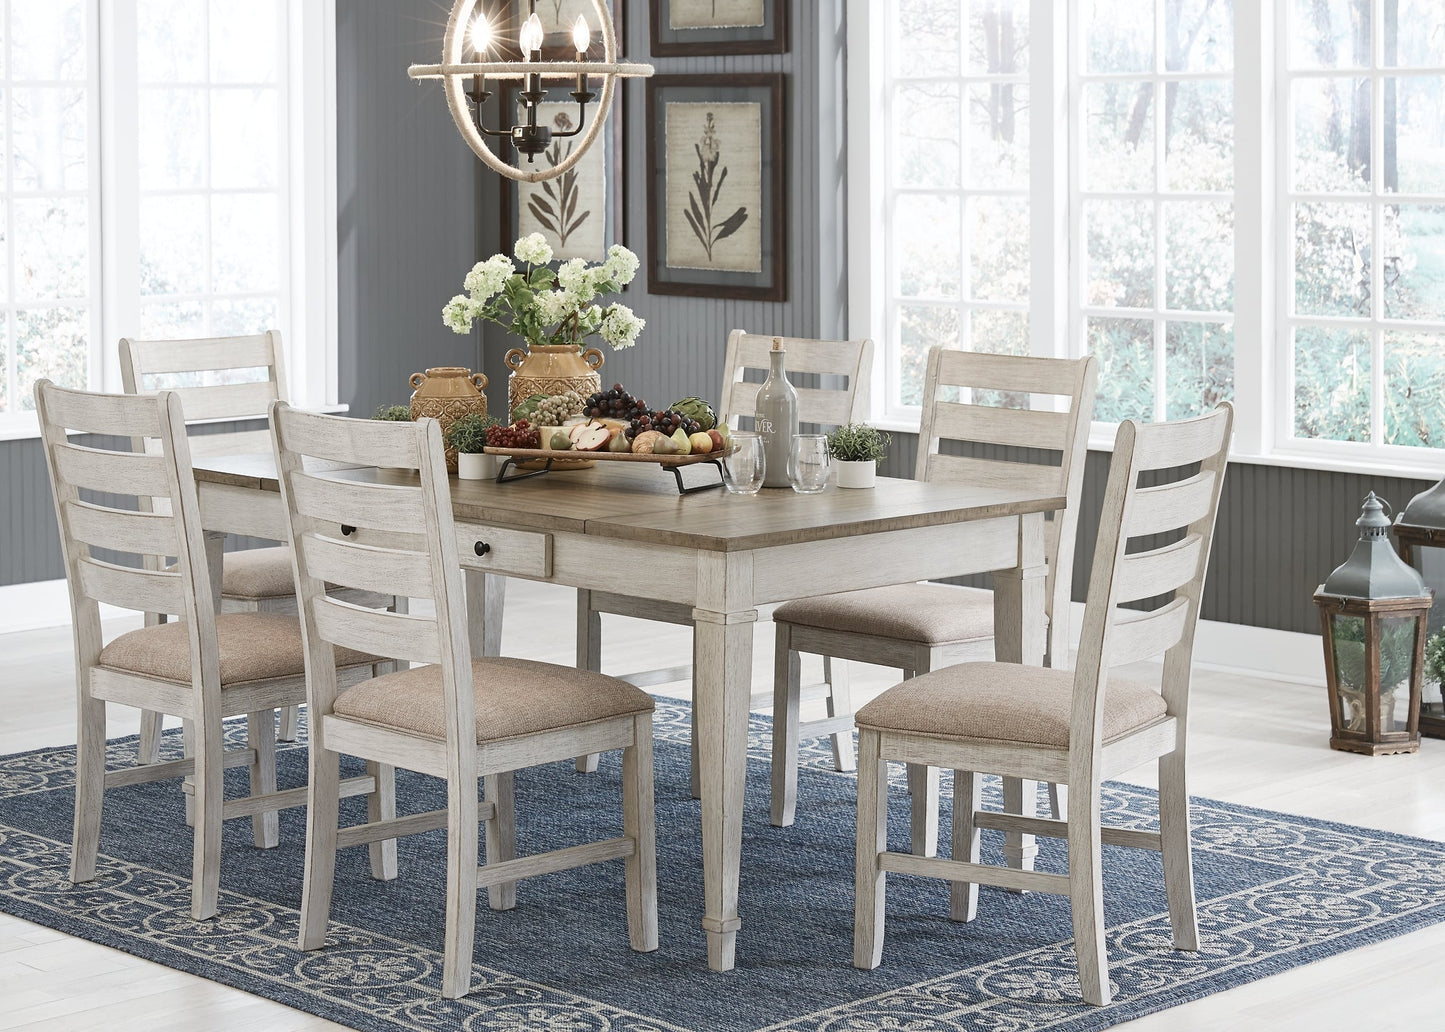 Skempton Dining Table and 6 Chairs at Cloud 9 Mattress & Furniture furniture, home furnishing, home decor